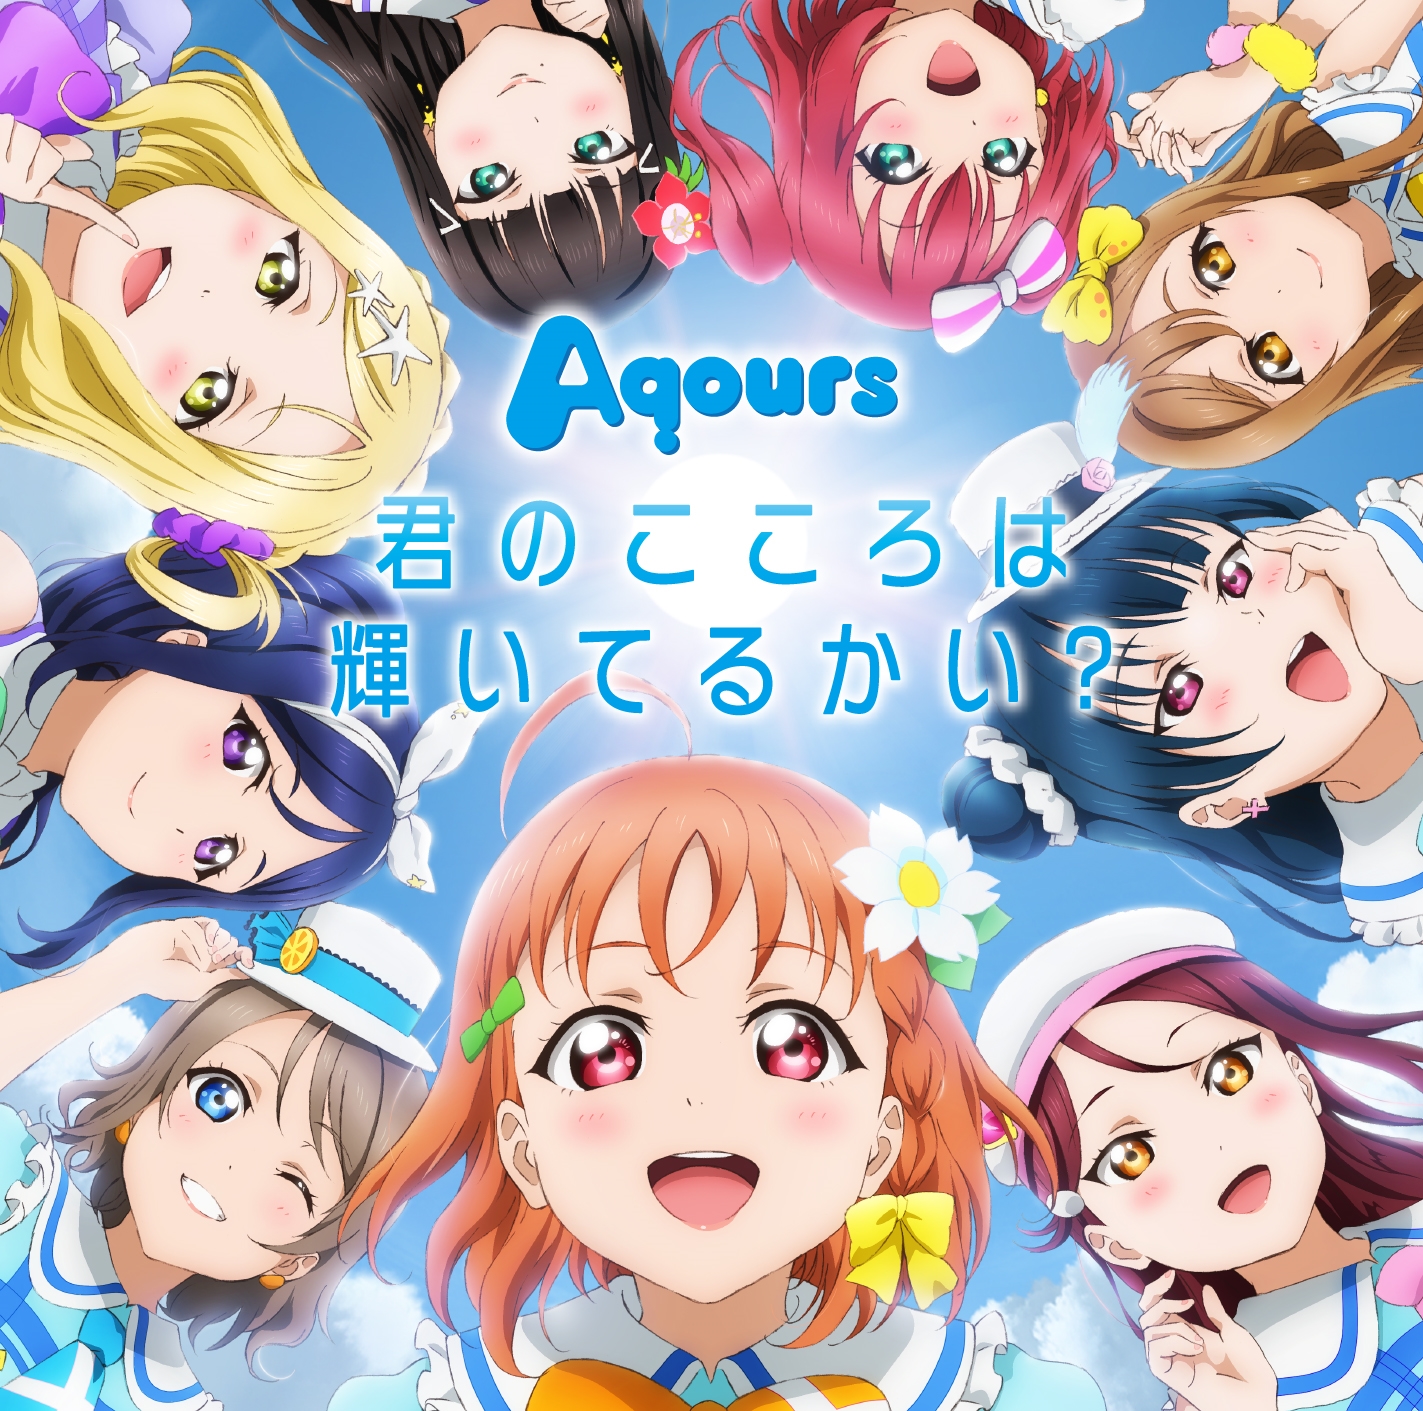 Image result for aqours heroes album cover